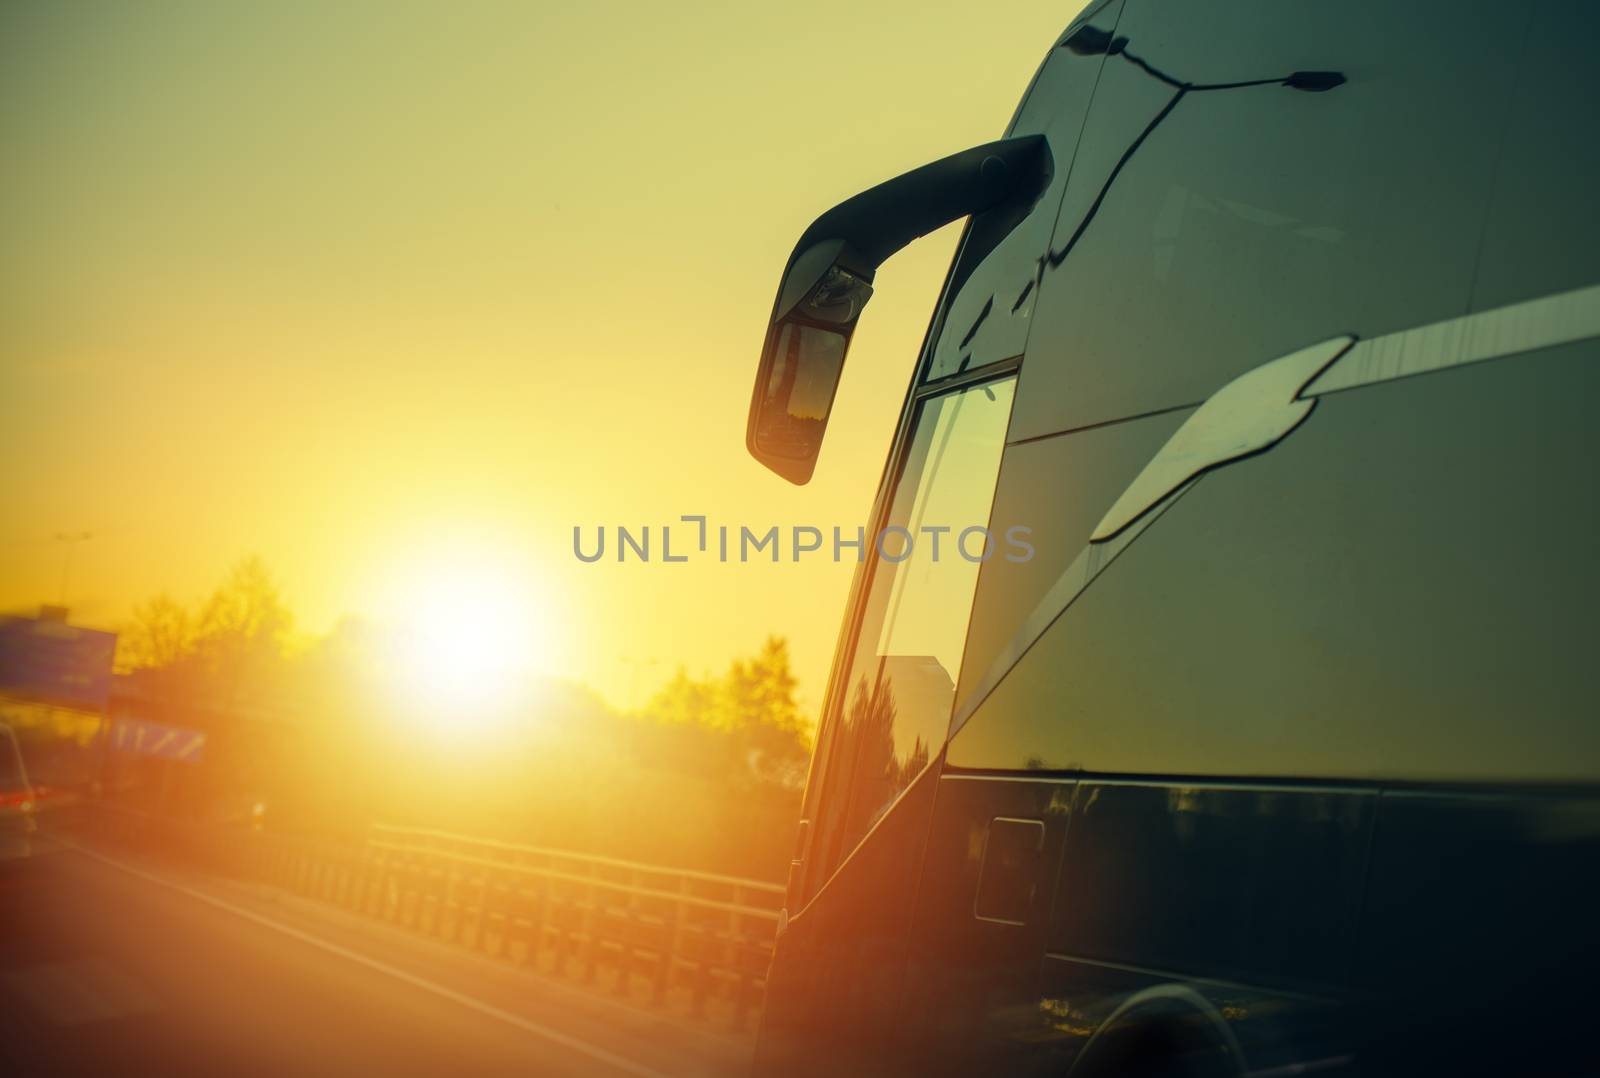 Motor Coach Bus on the Route During Scenic Sunset. Bus Transportation.